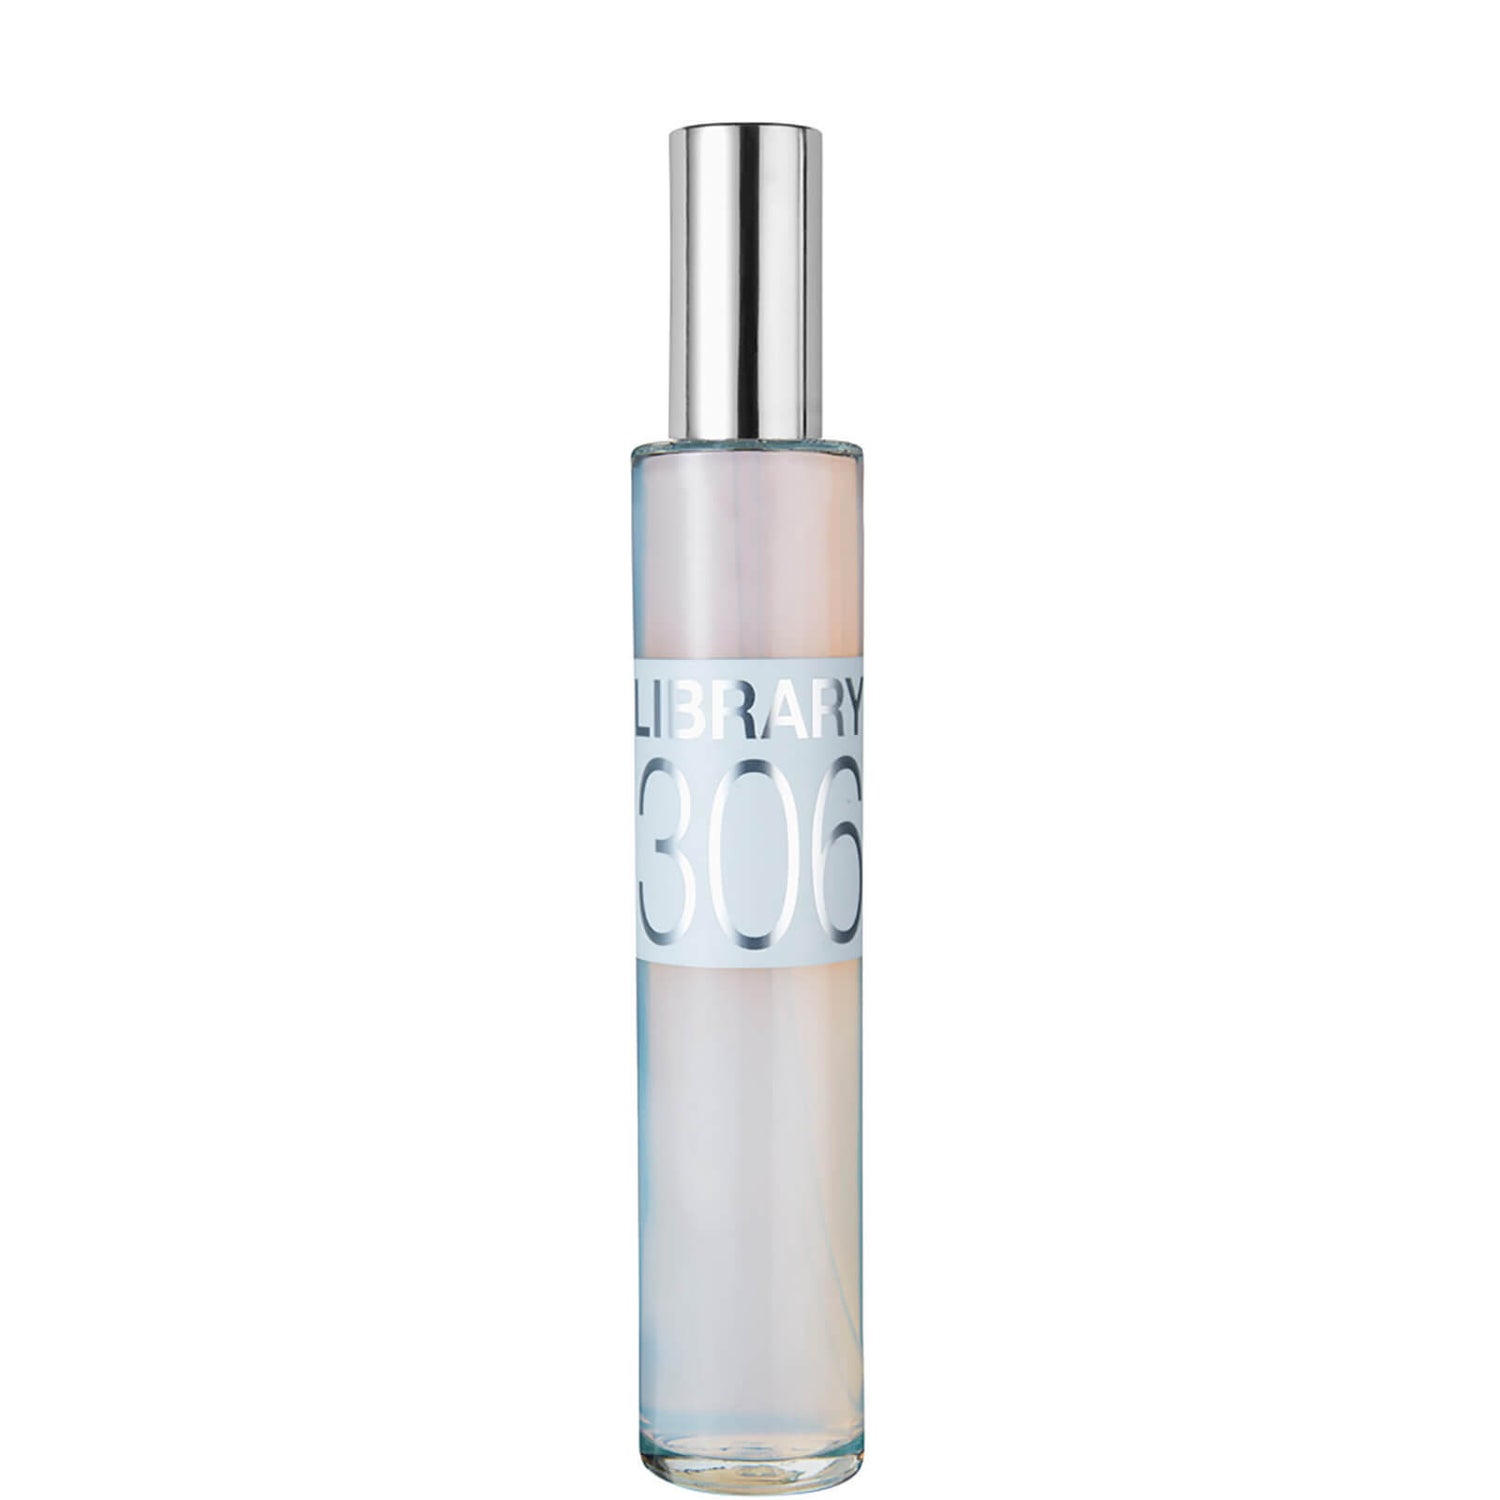 CB I Hate Perfume In the Library Water Perfume, 100ml